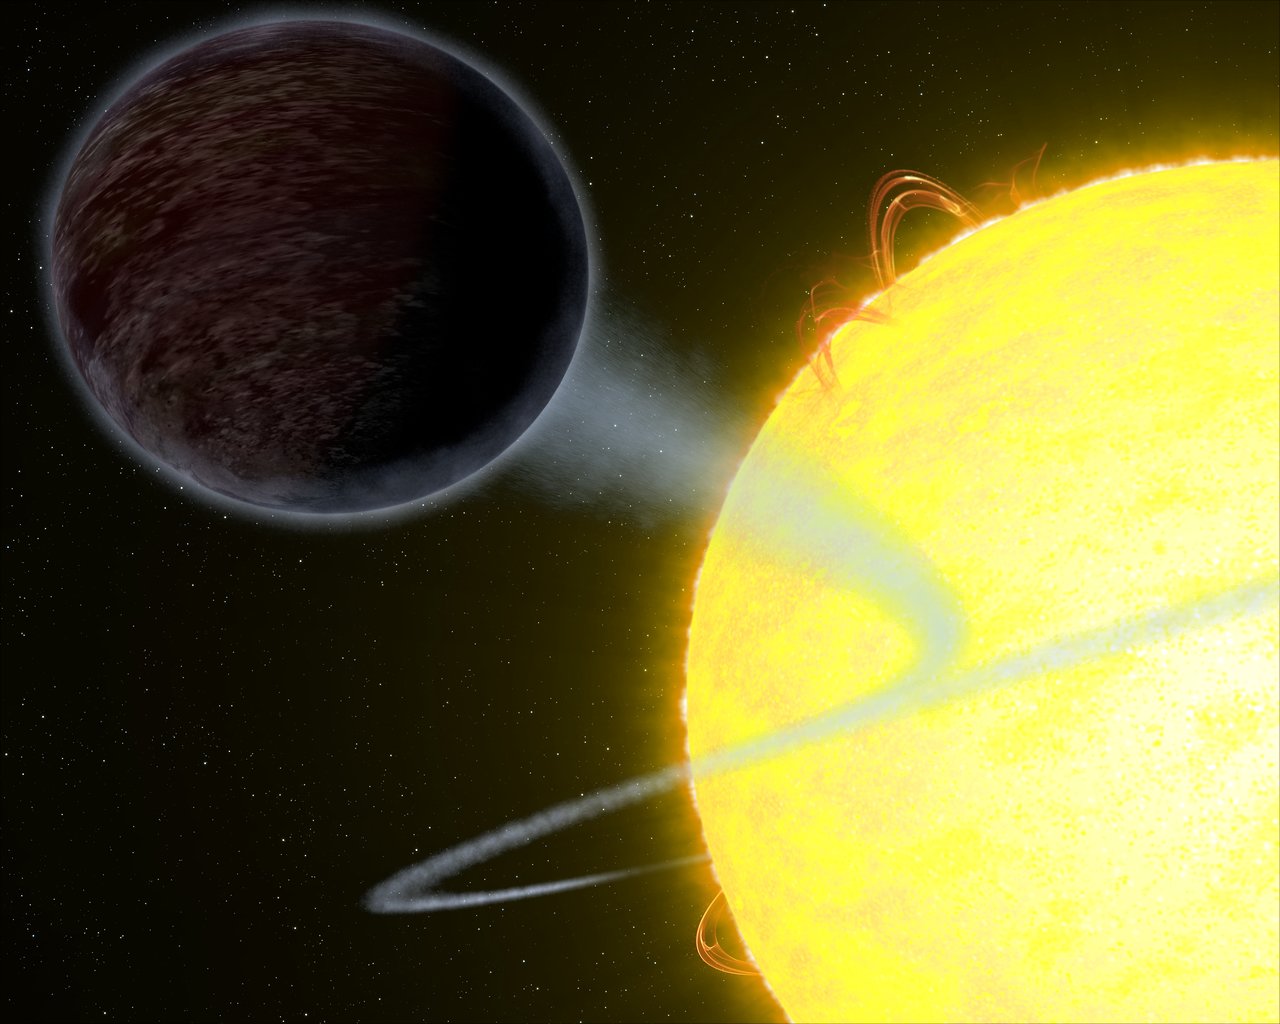 This artist’s impression shows the exoplanet WASP-12b — an alien world as black as fresh asphalt, orbiting a star like our Sun. Scientists were able to measure its albedo: the amount of light the planet reflects. The results showed that the planet is extremely dark at optical wavelengths.